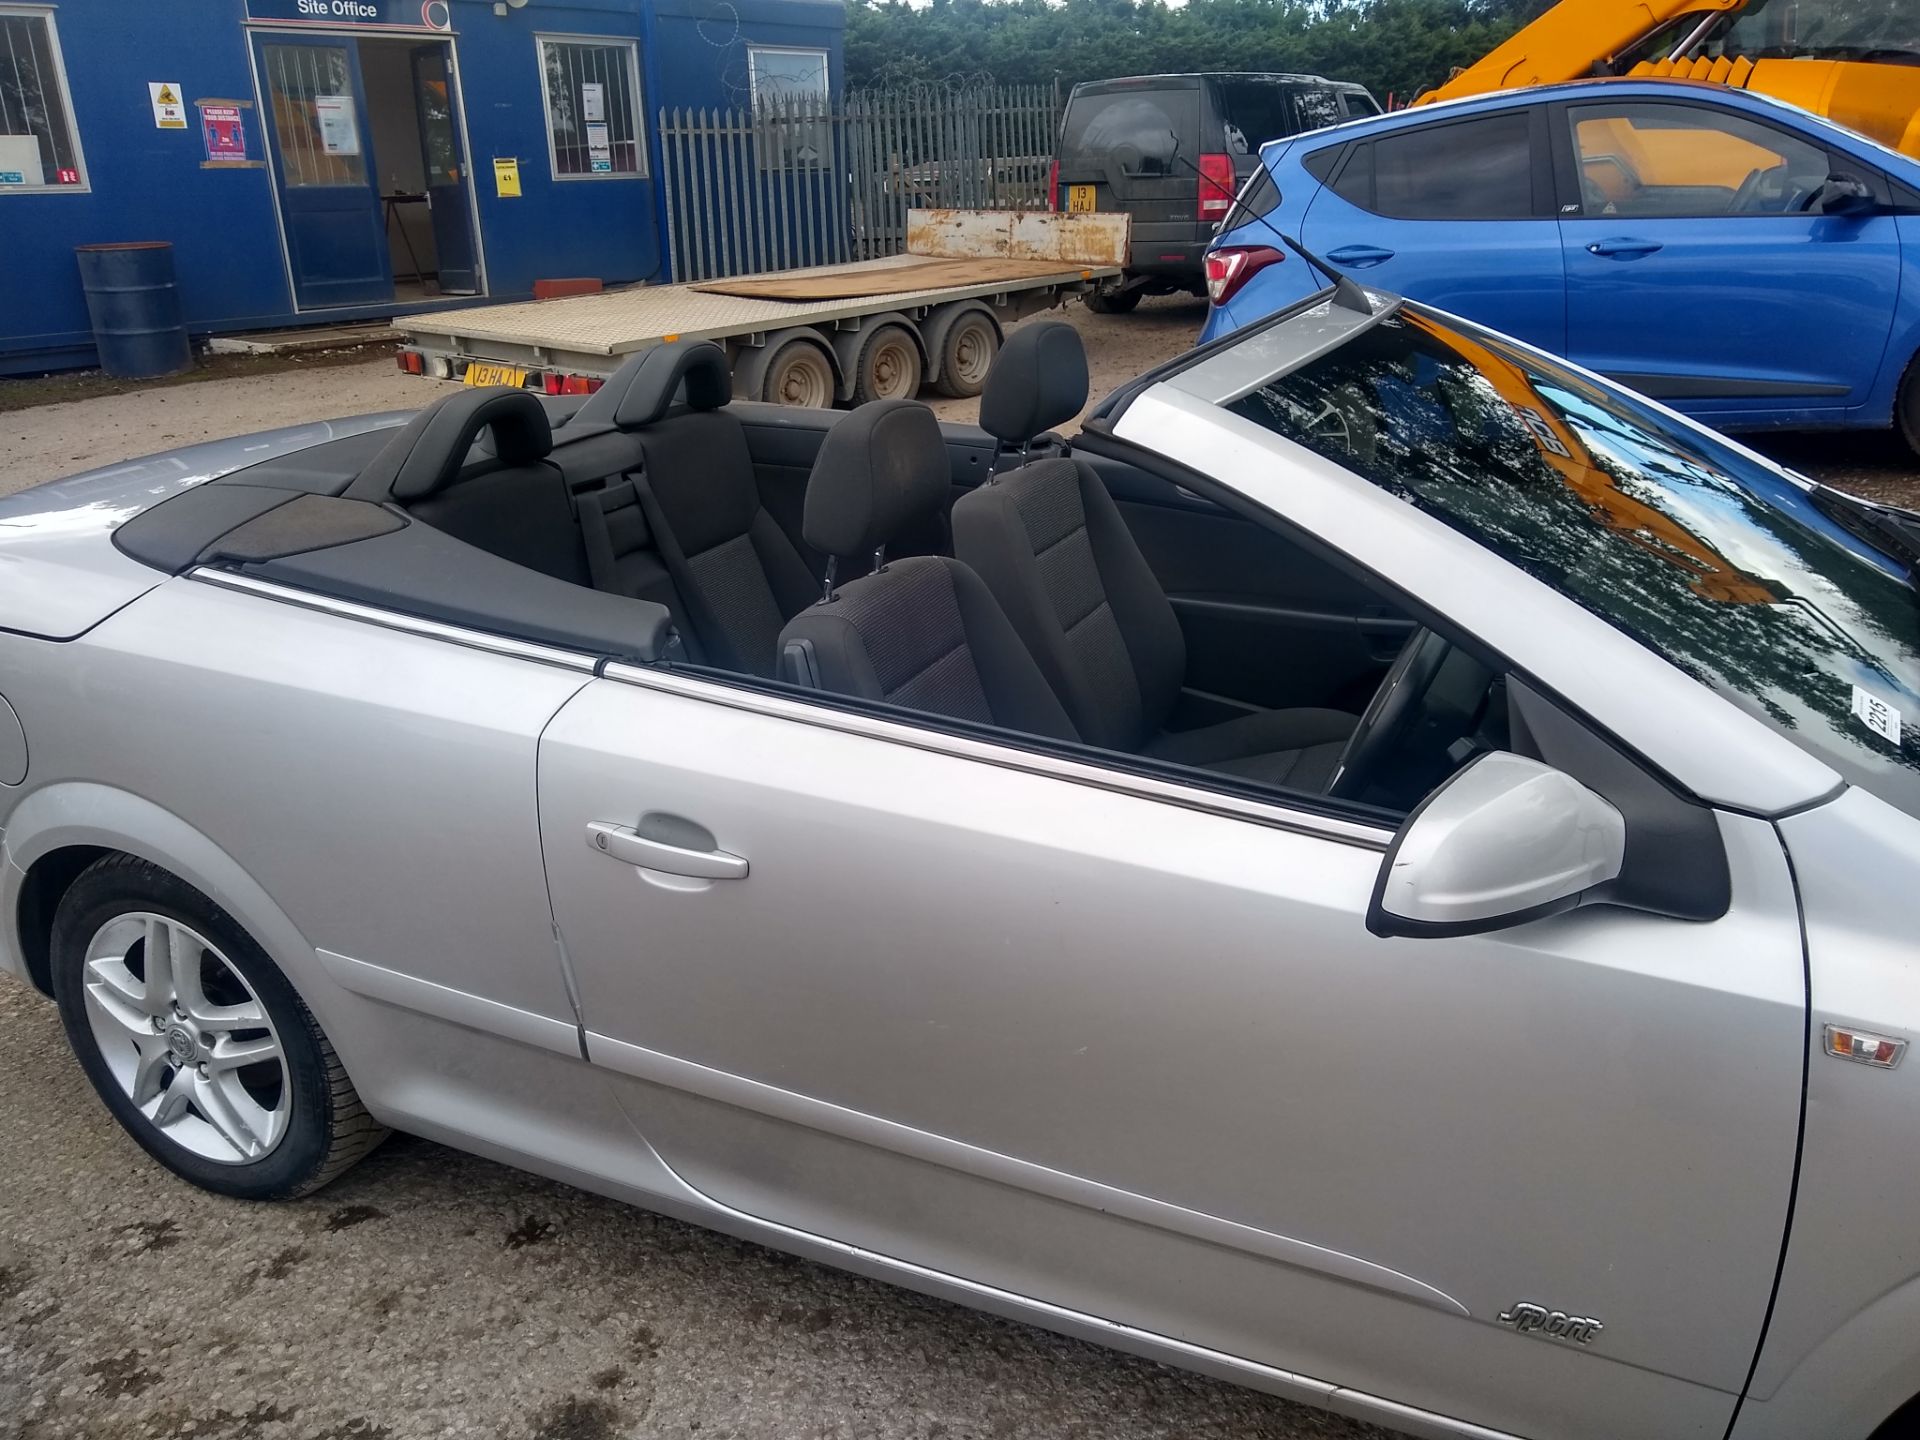 2007 Vauxhall Astra Convertible KB07CYZ 2007 Vauxhall Astra 1.8 Twin Top Convertible, MOT EXP - 00's - Image 10 of 10